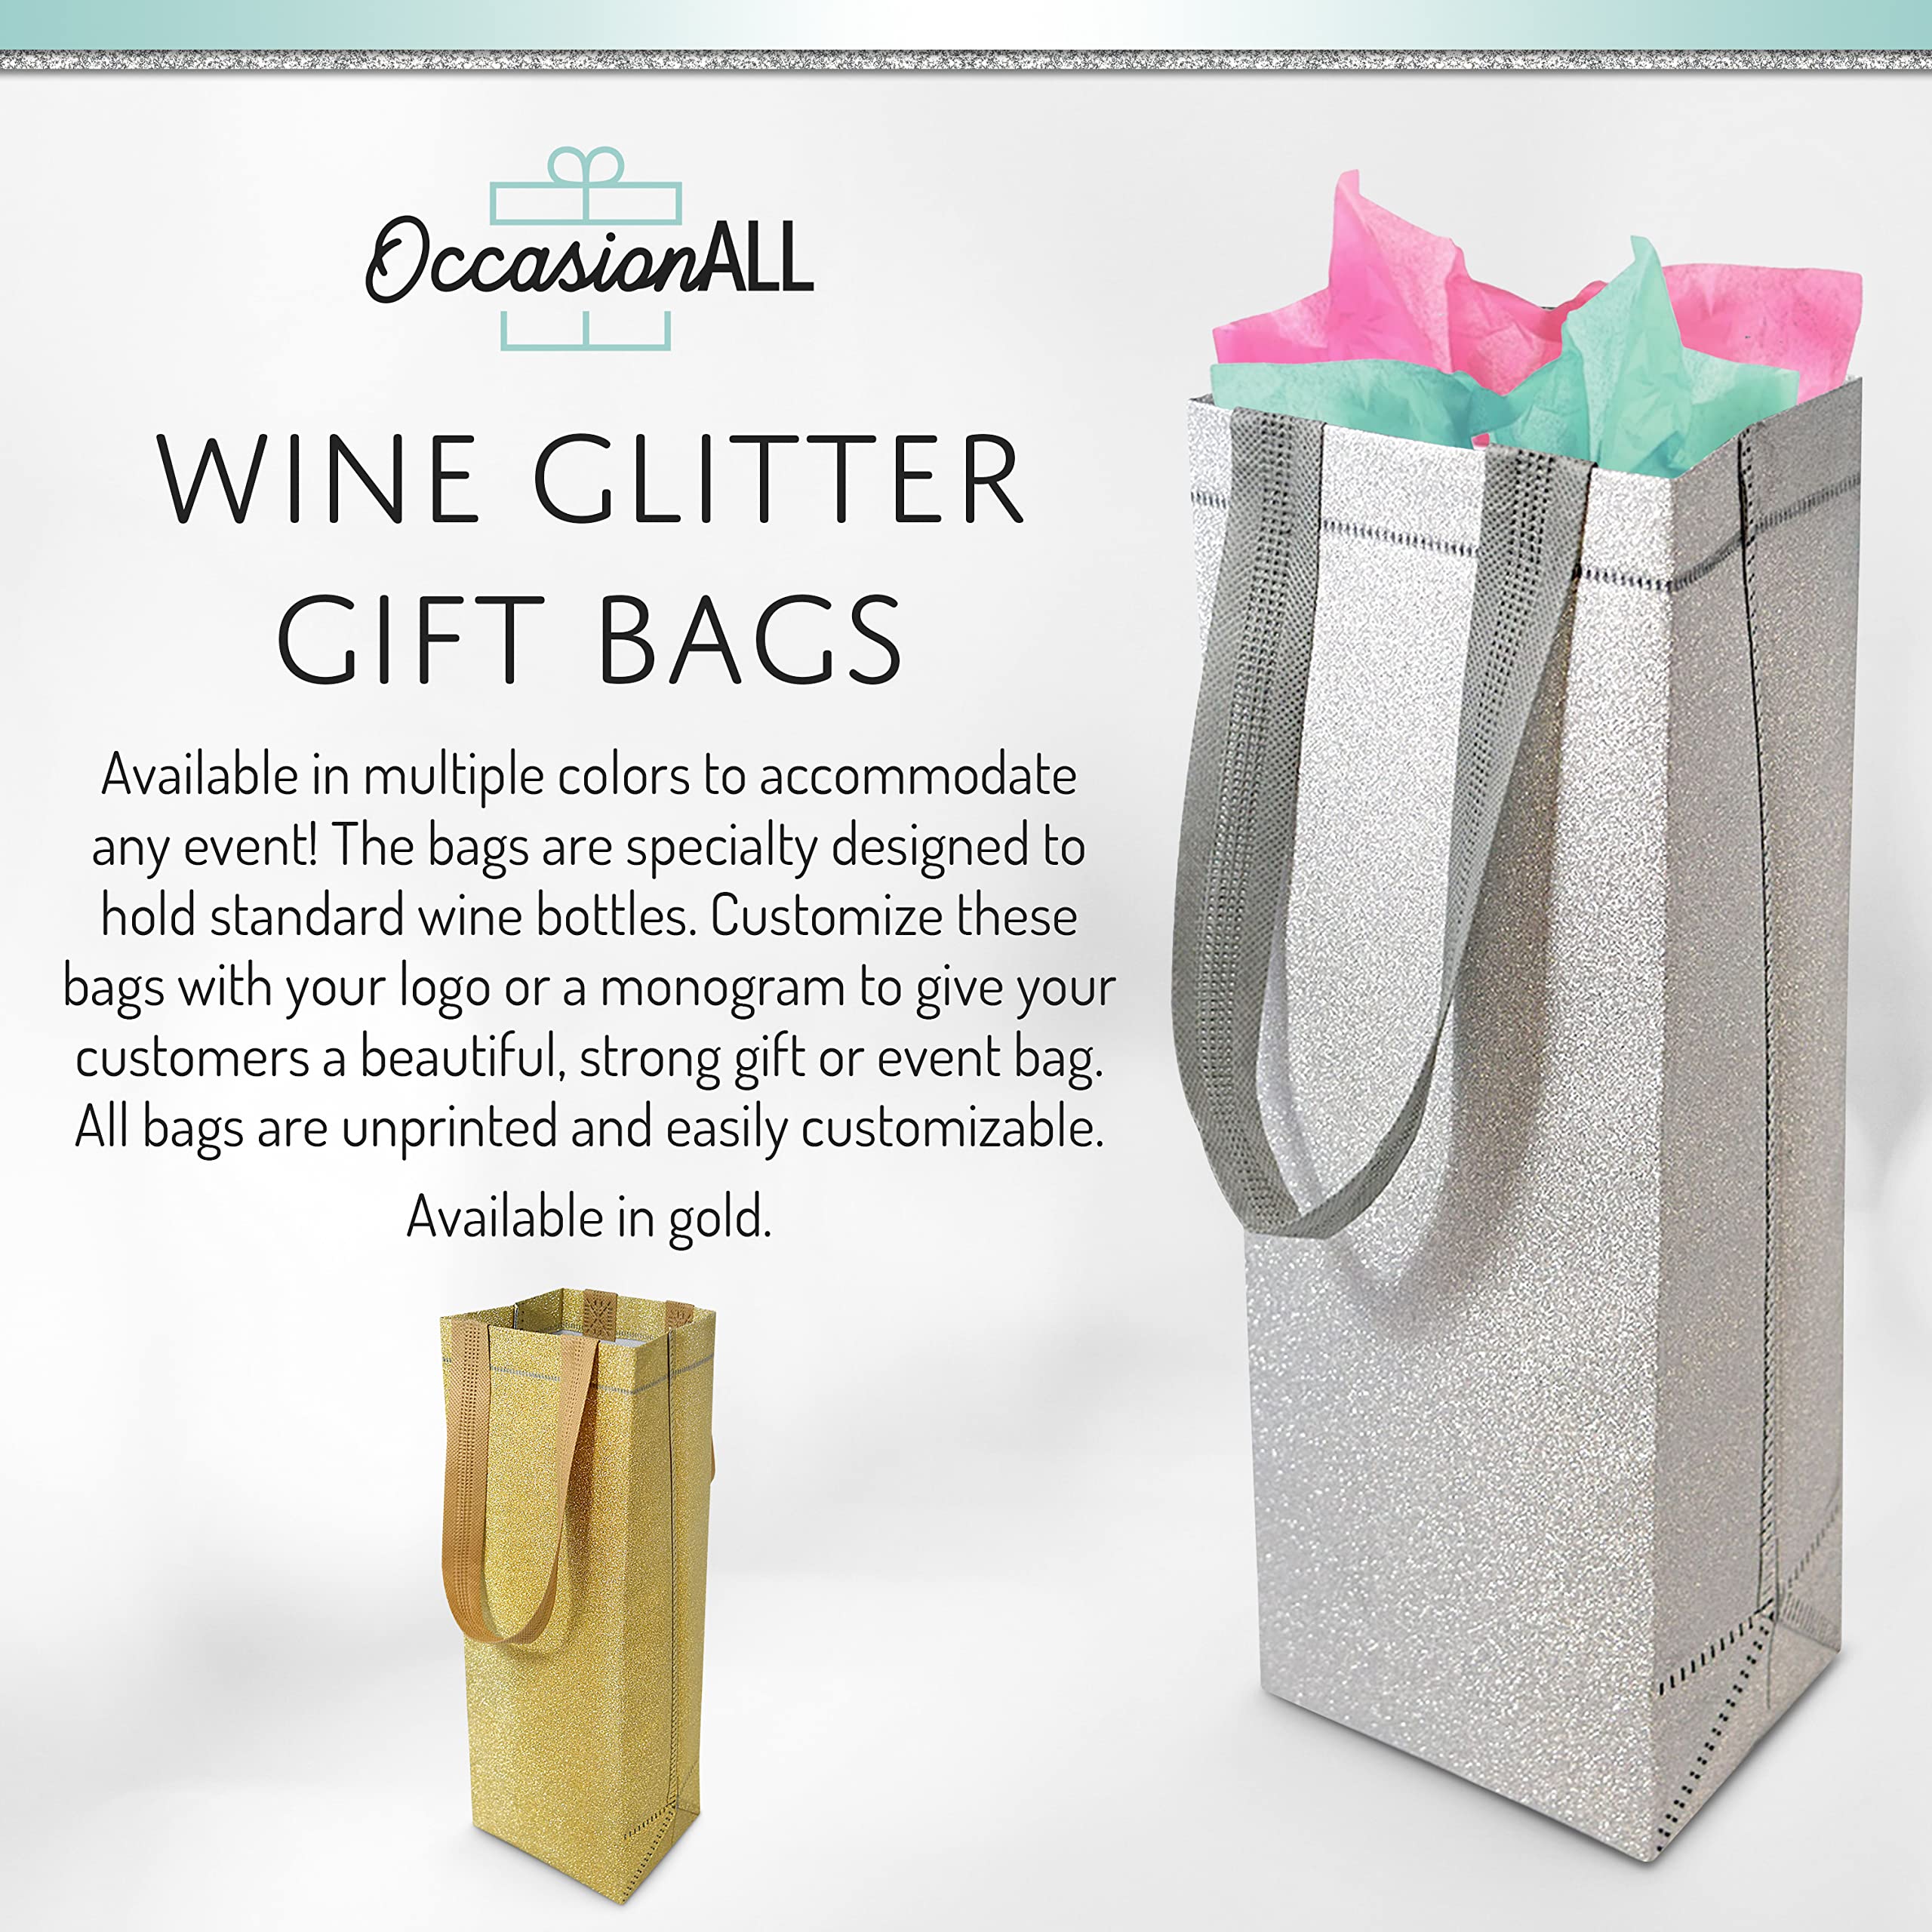 OccasionALL 5x4x14 12 Piece Large Wine Gift Bags with Handles, Silver Reusable Wine Bags, Bottle Box, Christmas Bottle Bags for Alcohol Champagne Wine  - Like New